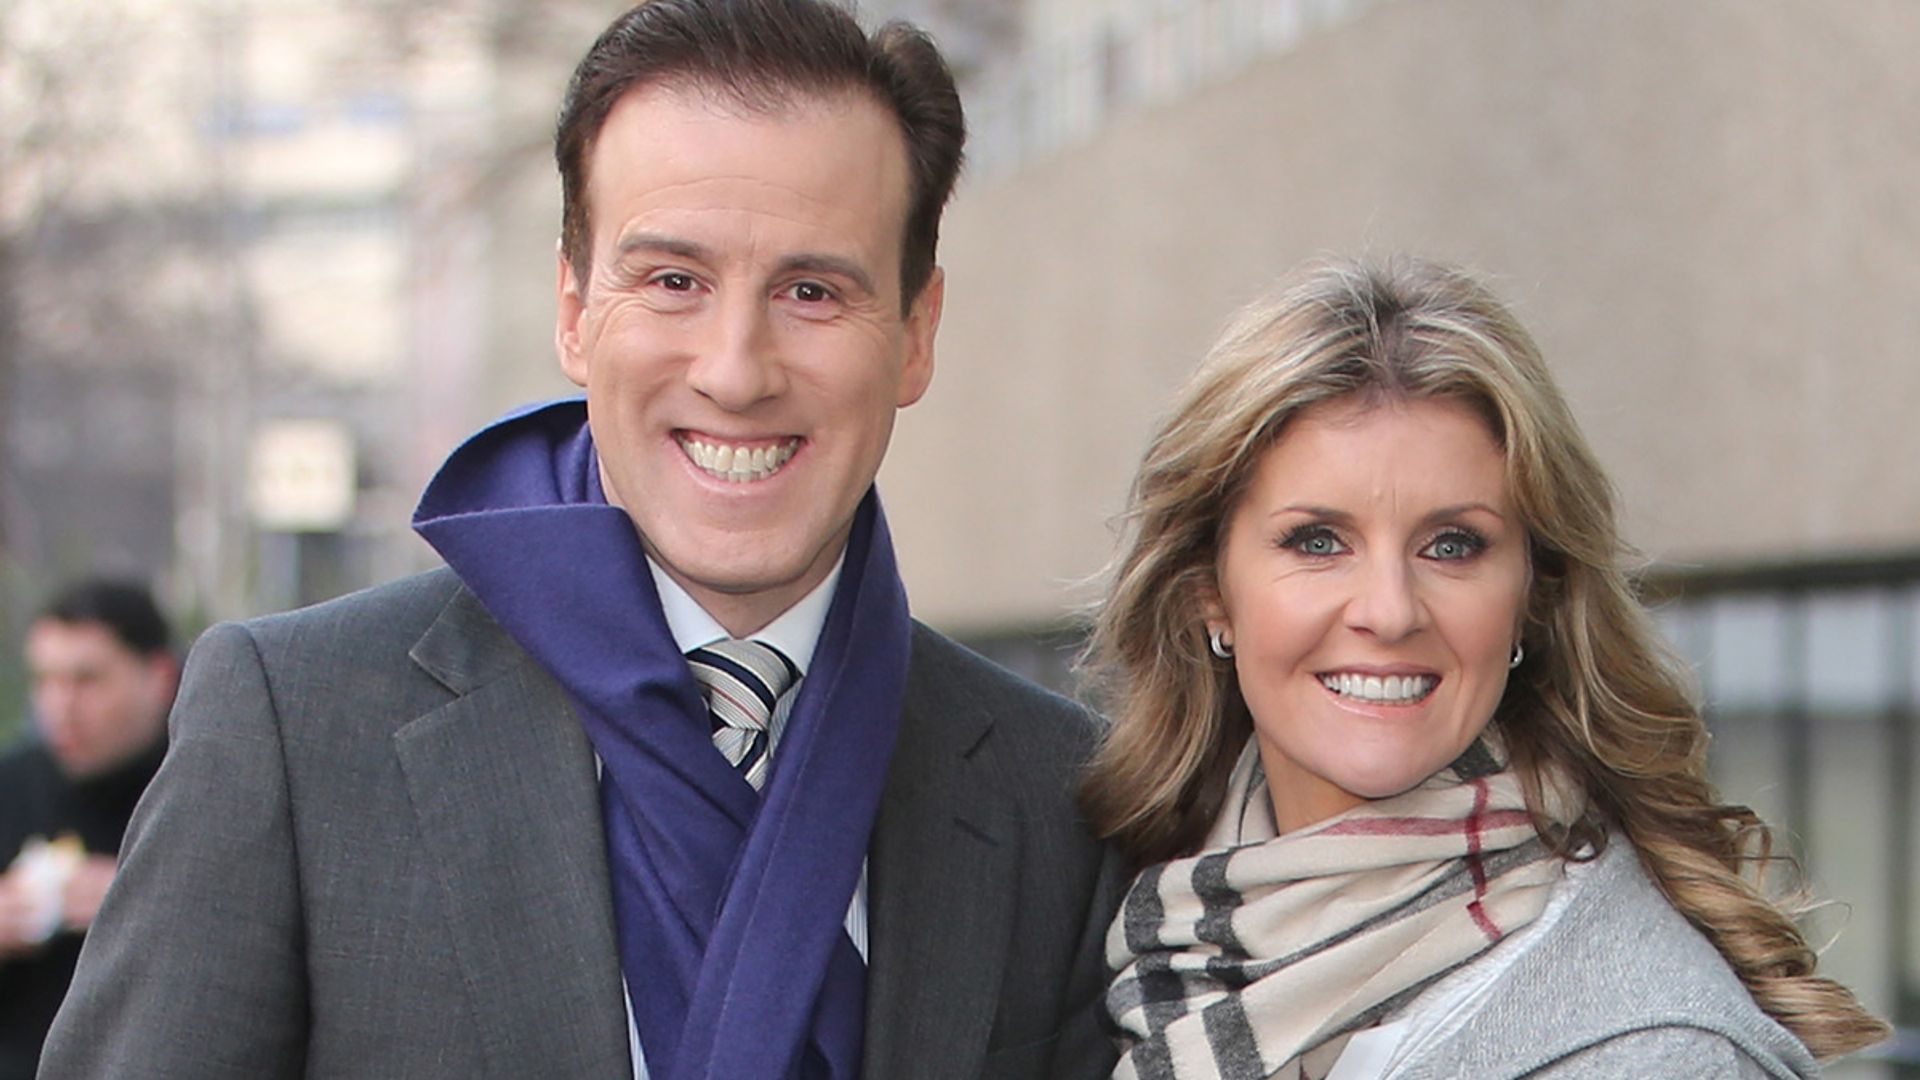 Anton du Beke and Erin Boag explain why it's so much harder to be a Strictly pro dancer nowadays